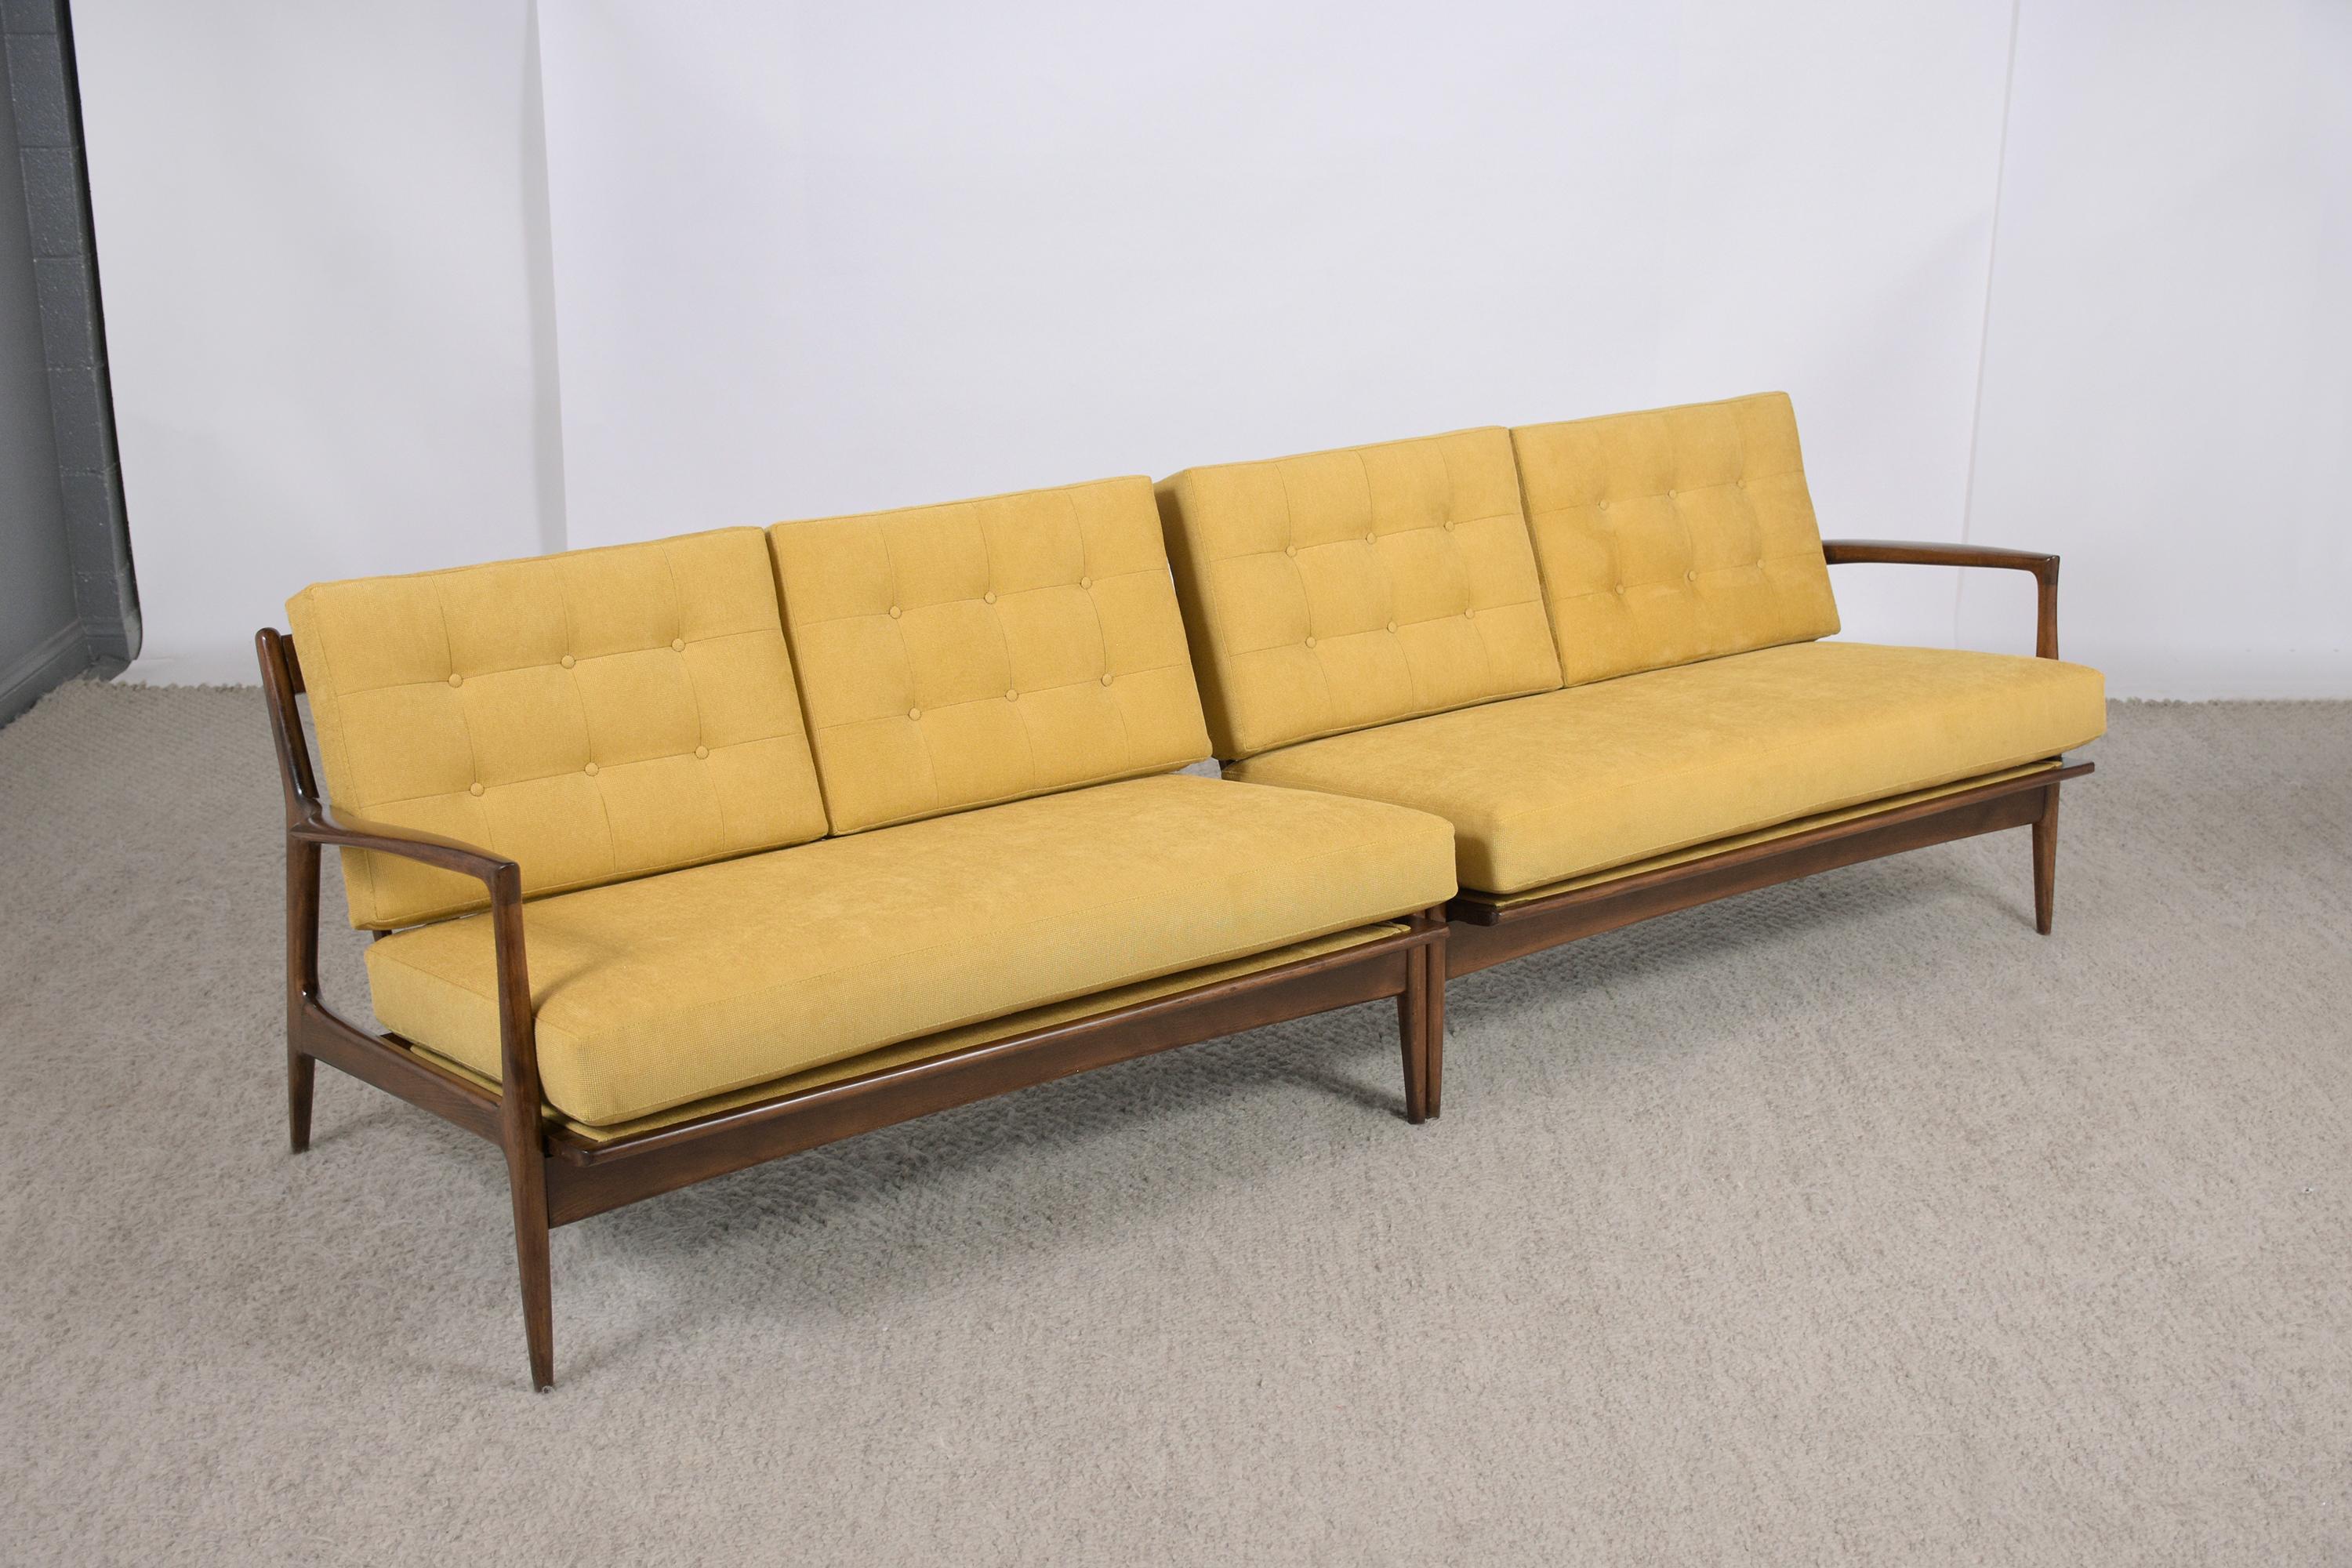 Immerse yourself in the classic charm of the 1960s with our mid-century modern Danish sectional sofa, a masterpiece of Scandinavian design handcrafted from teak wood. This vintage sofa has been meticulously restored by our team of skilled craftsmen,